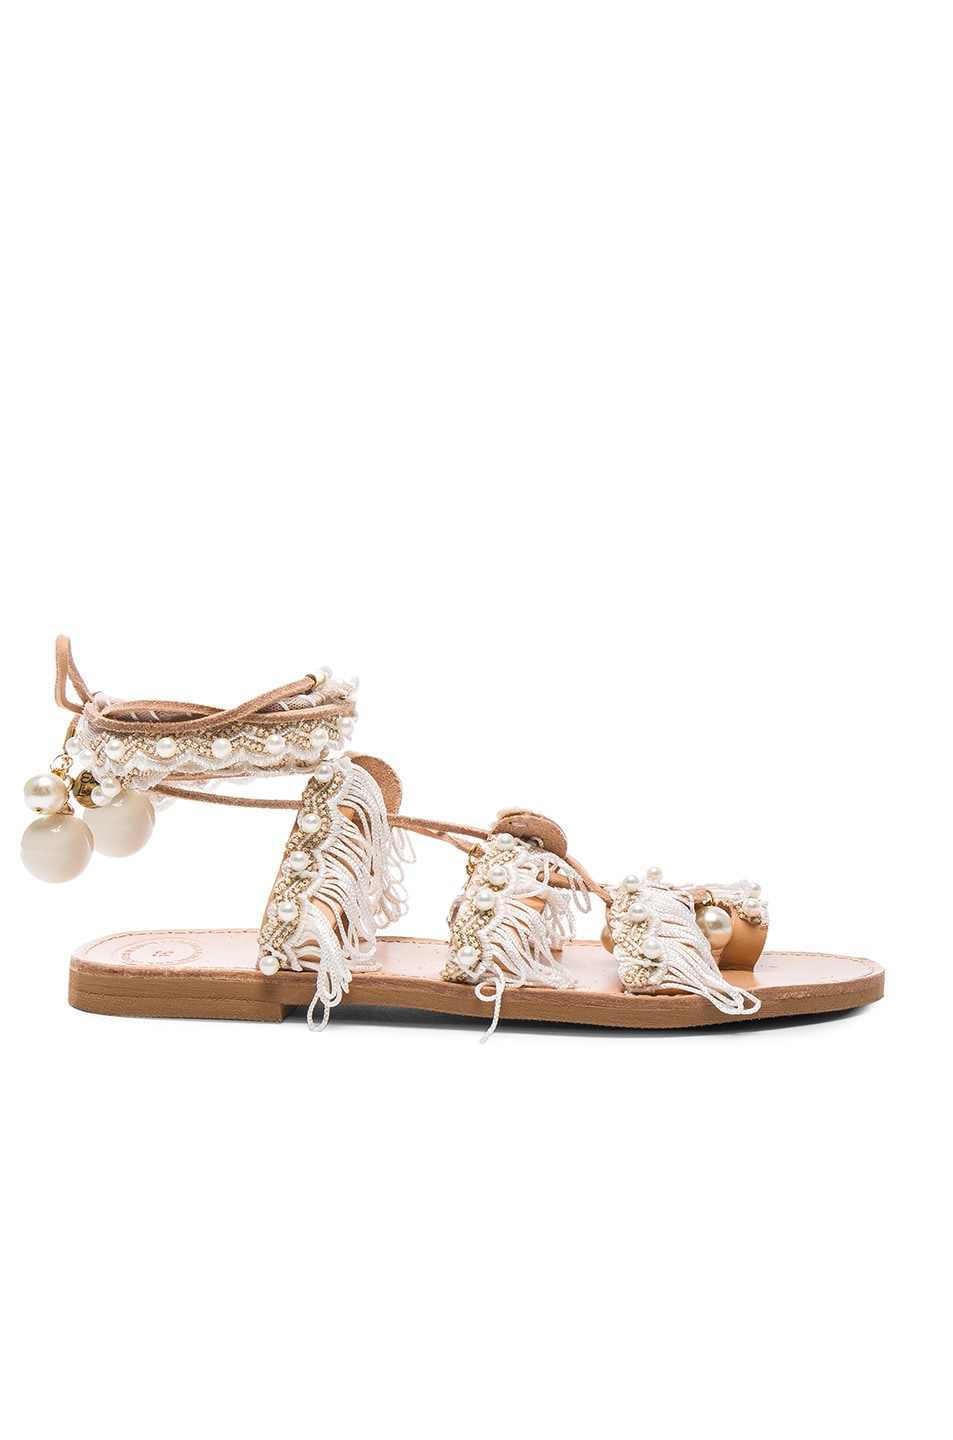 Elina Linardaki Leather Ever After Sandals in White | FWRD